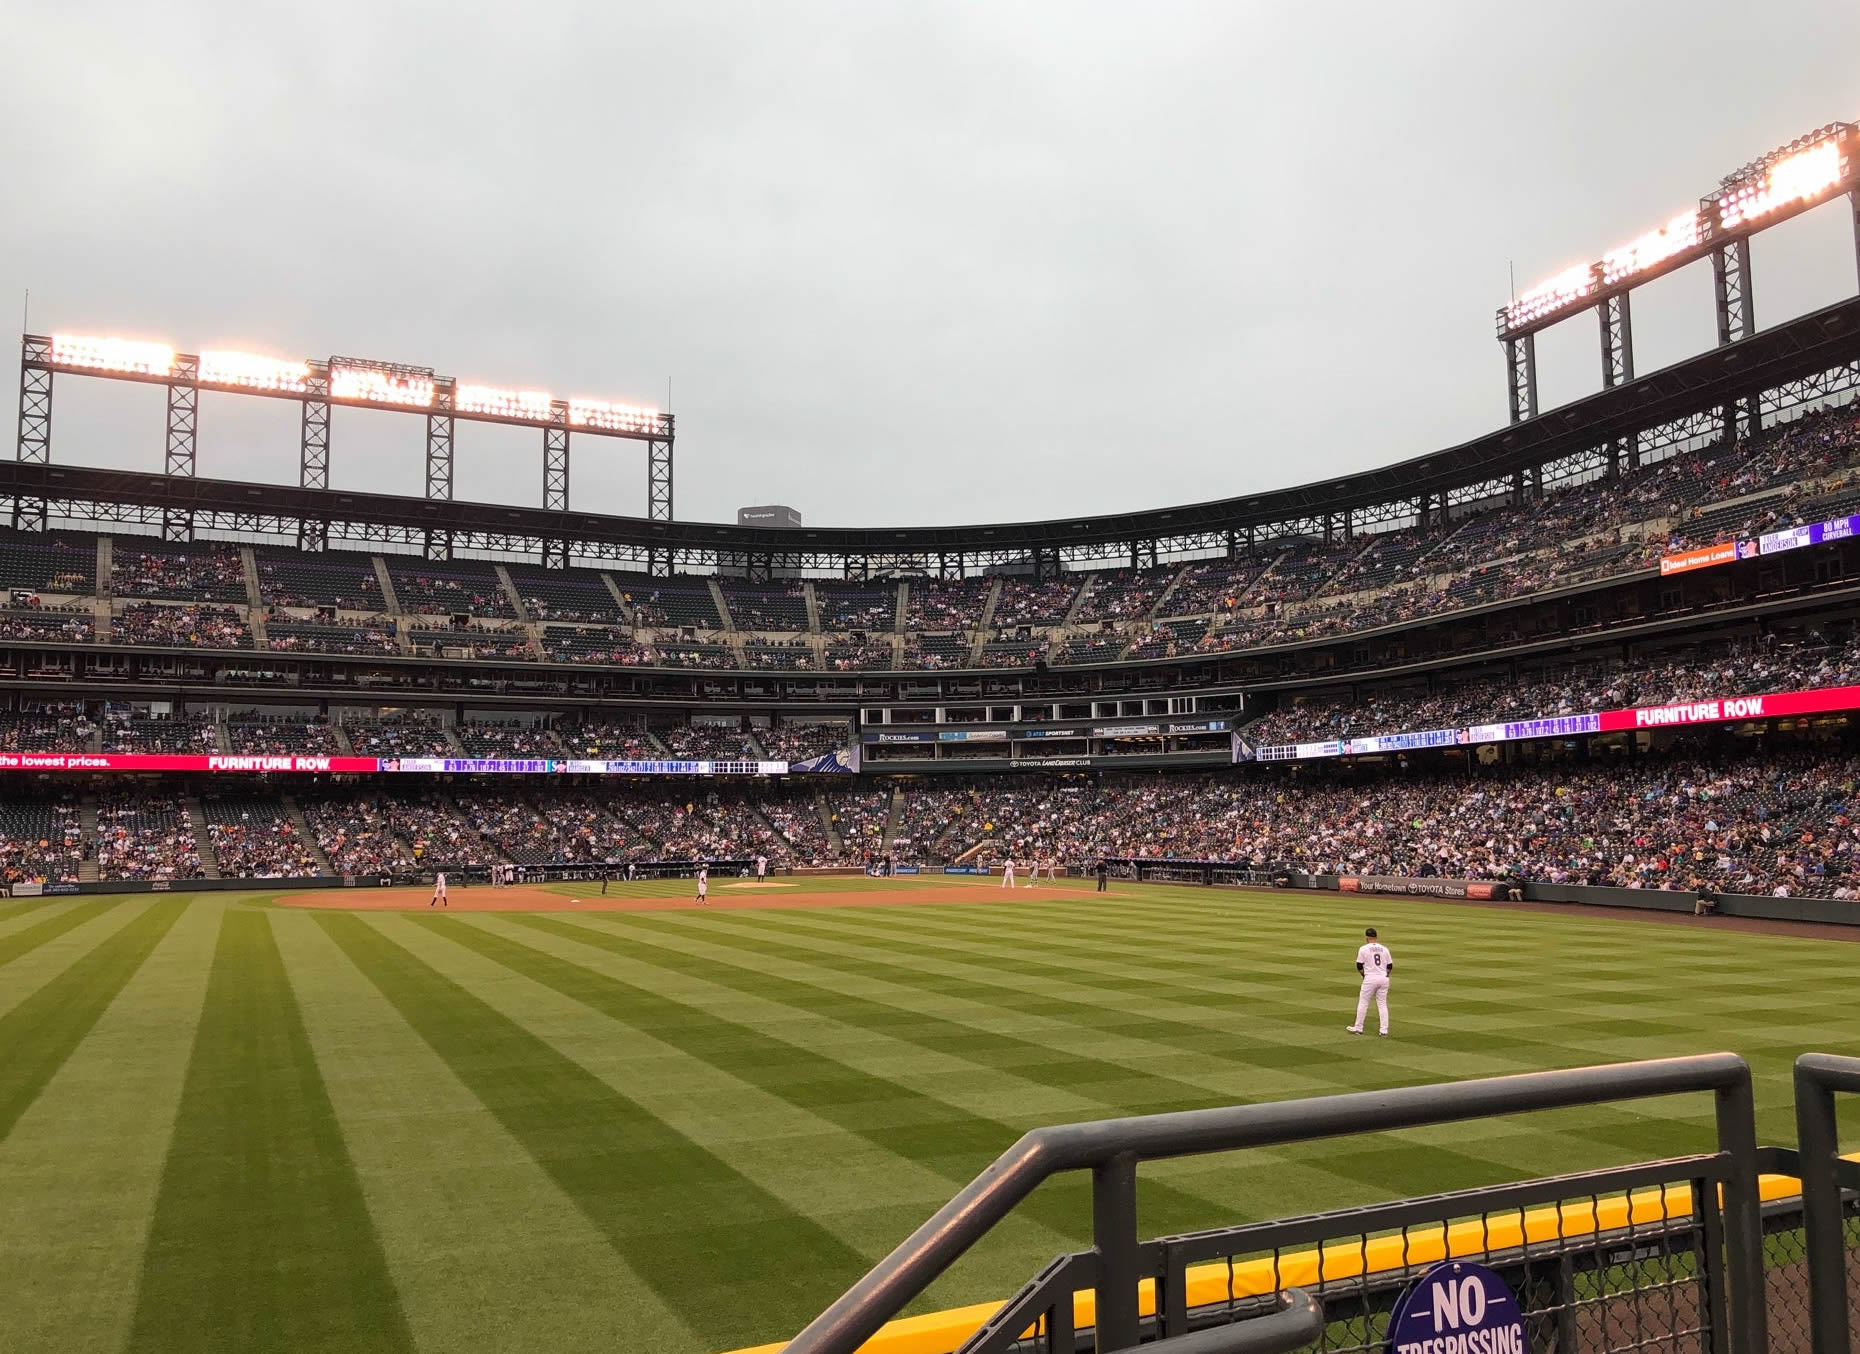 section 155, row 2 seat view  - coors field